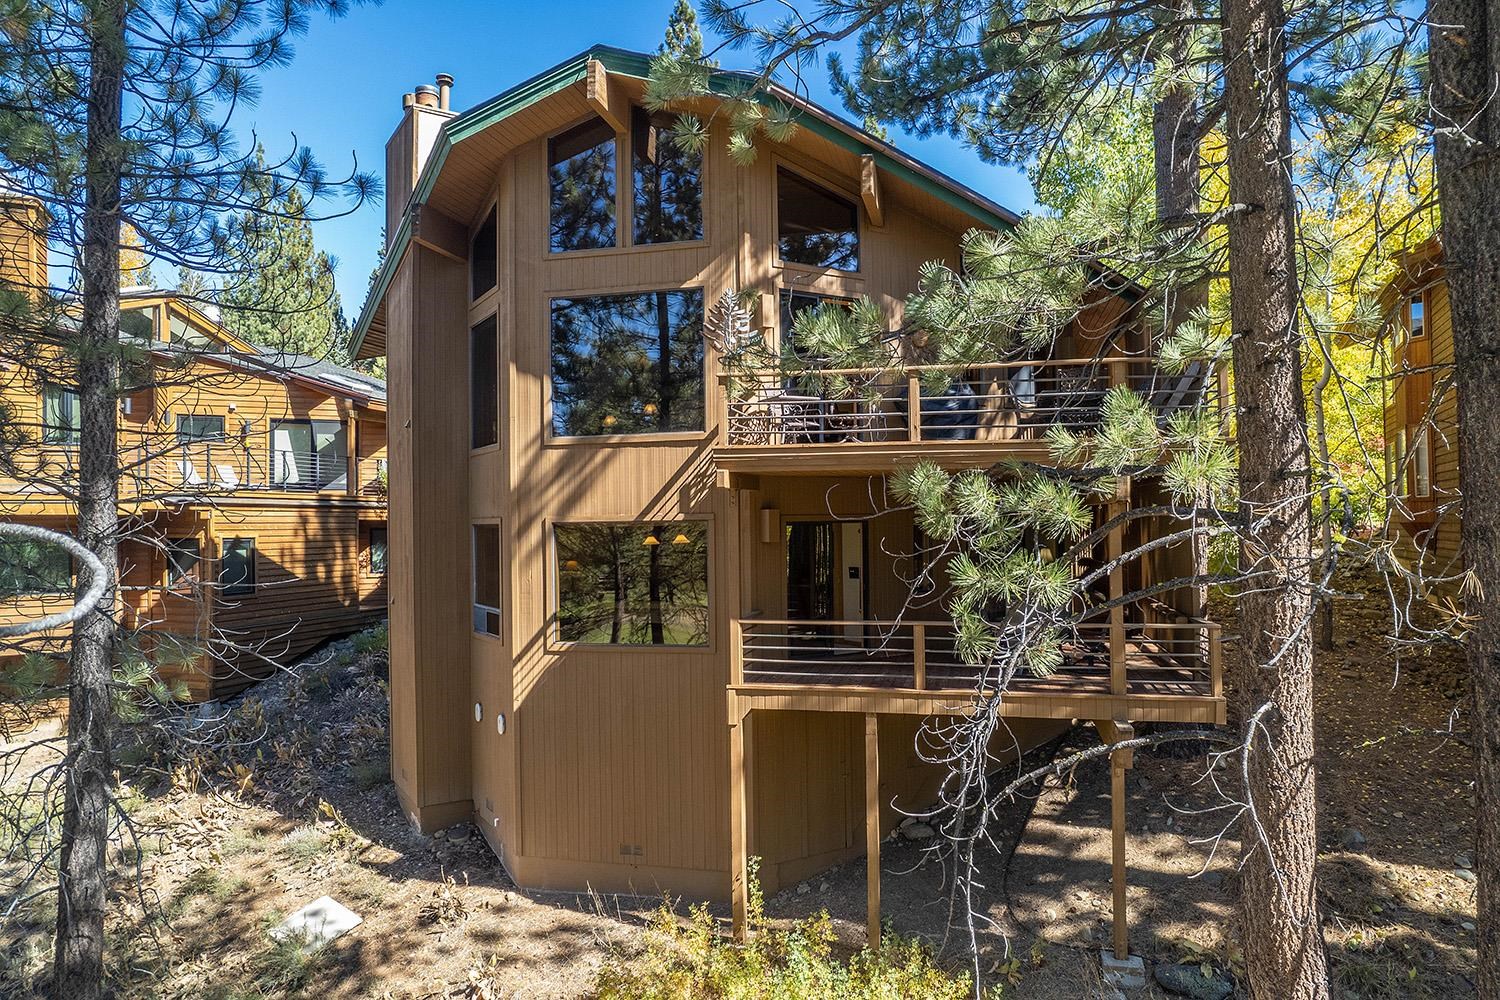 Image for 351 Skidder Trail, Truckee, CA 96161-0000